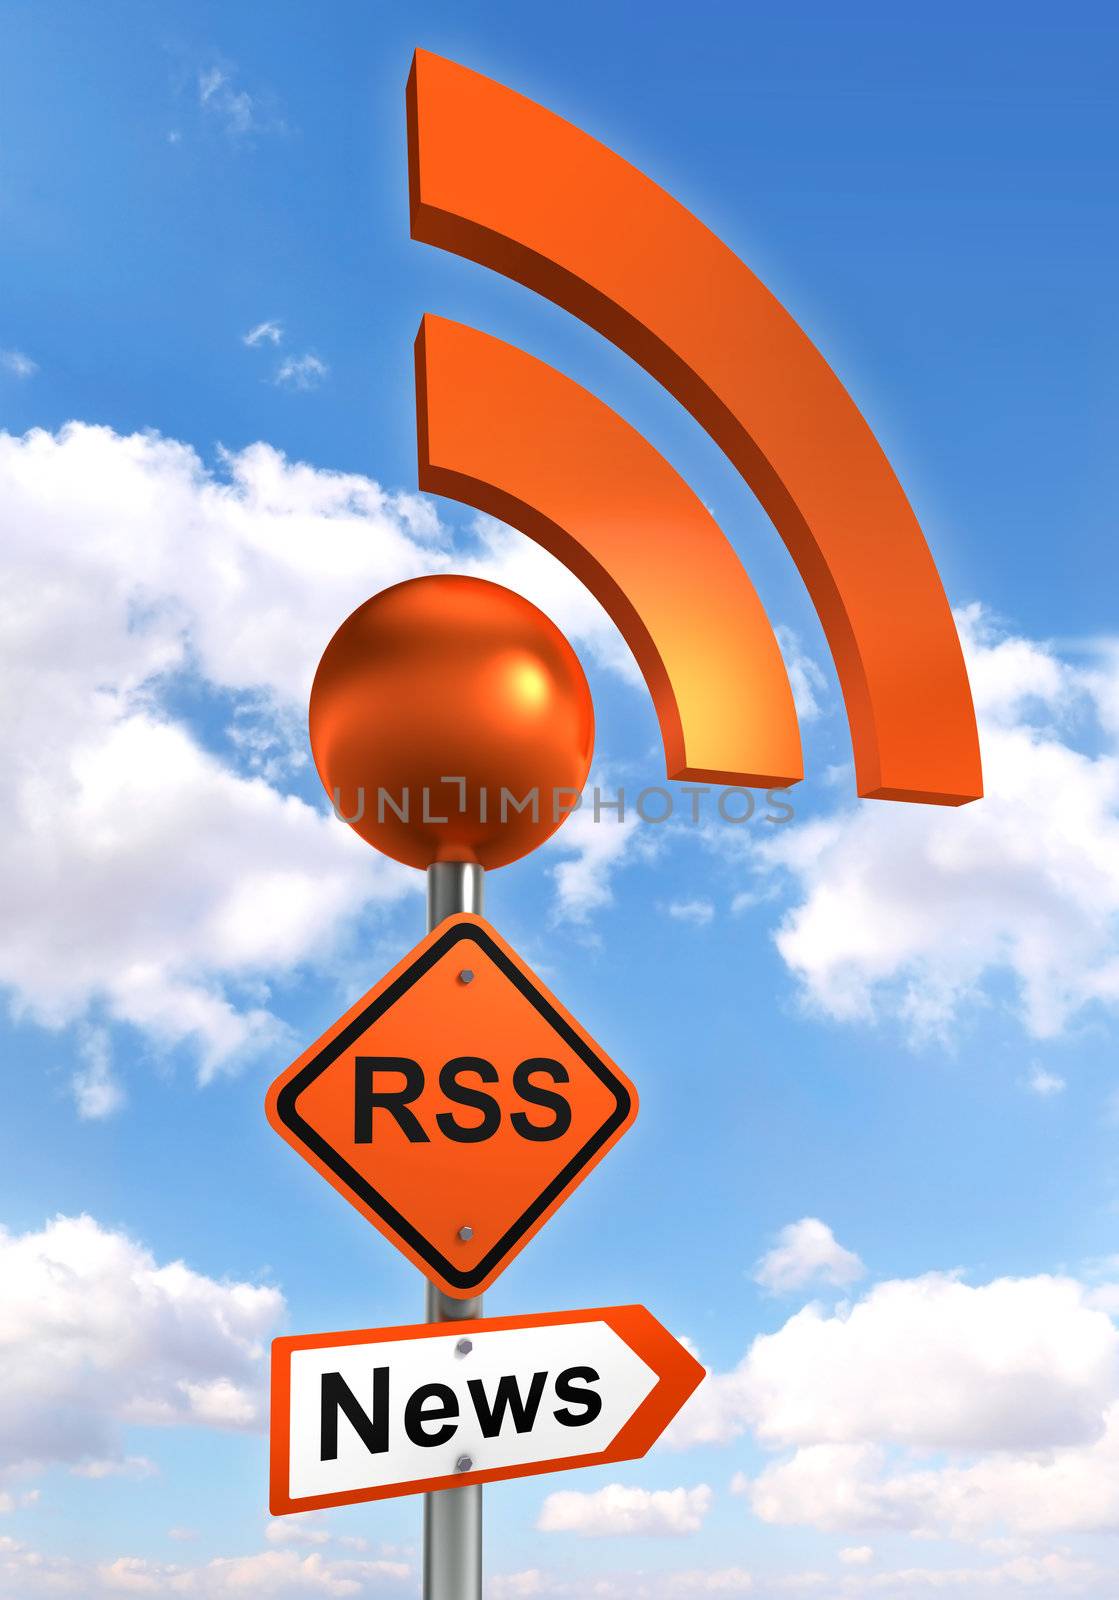 rss road orange sign on pole with sky background. clipping path included